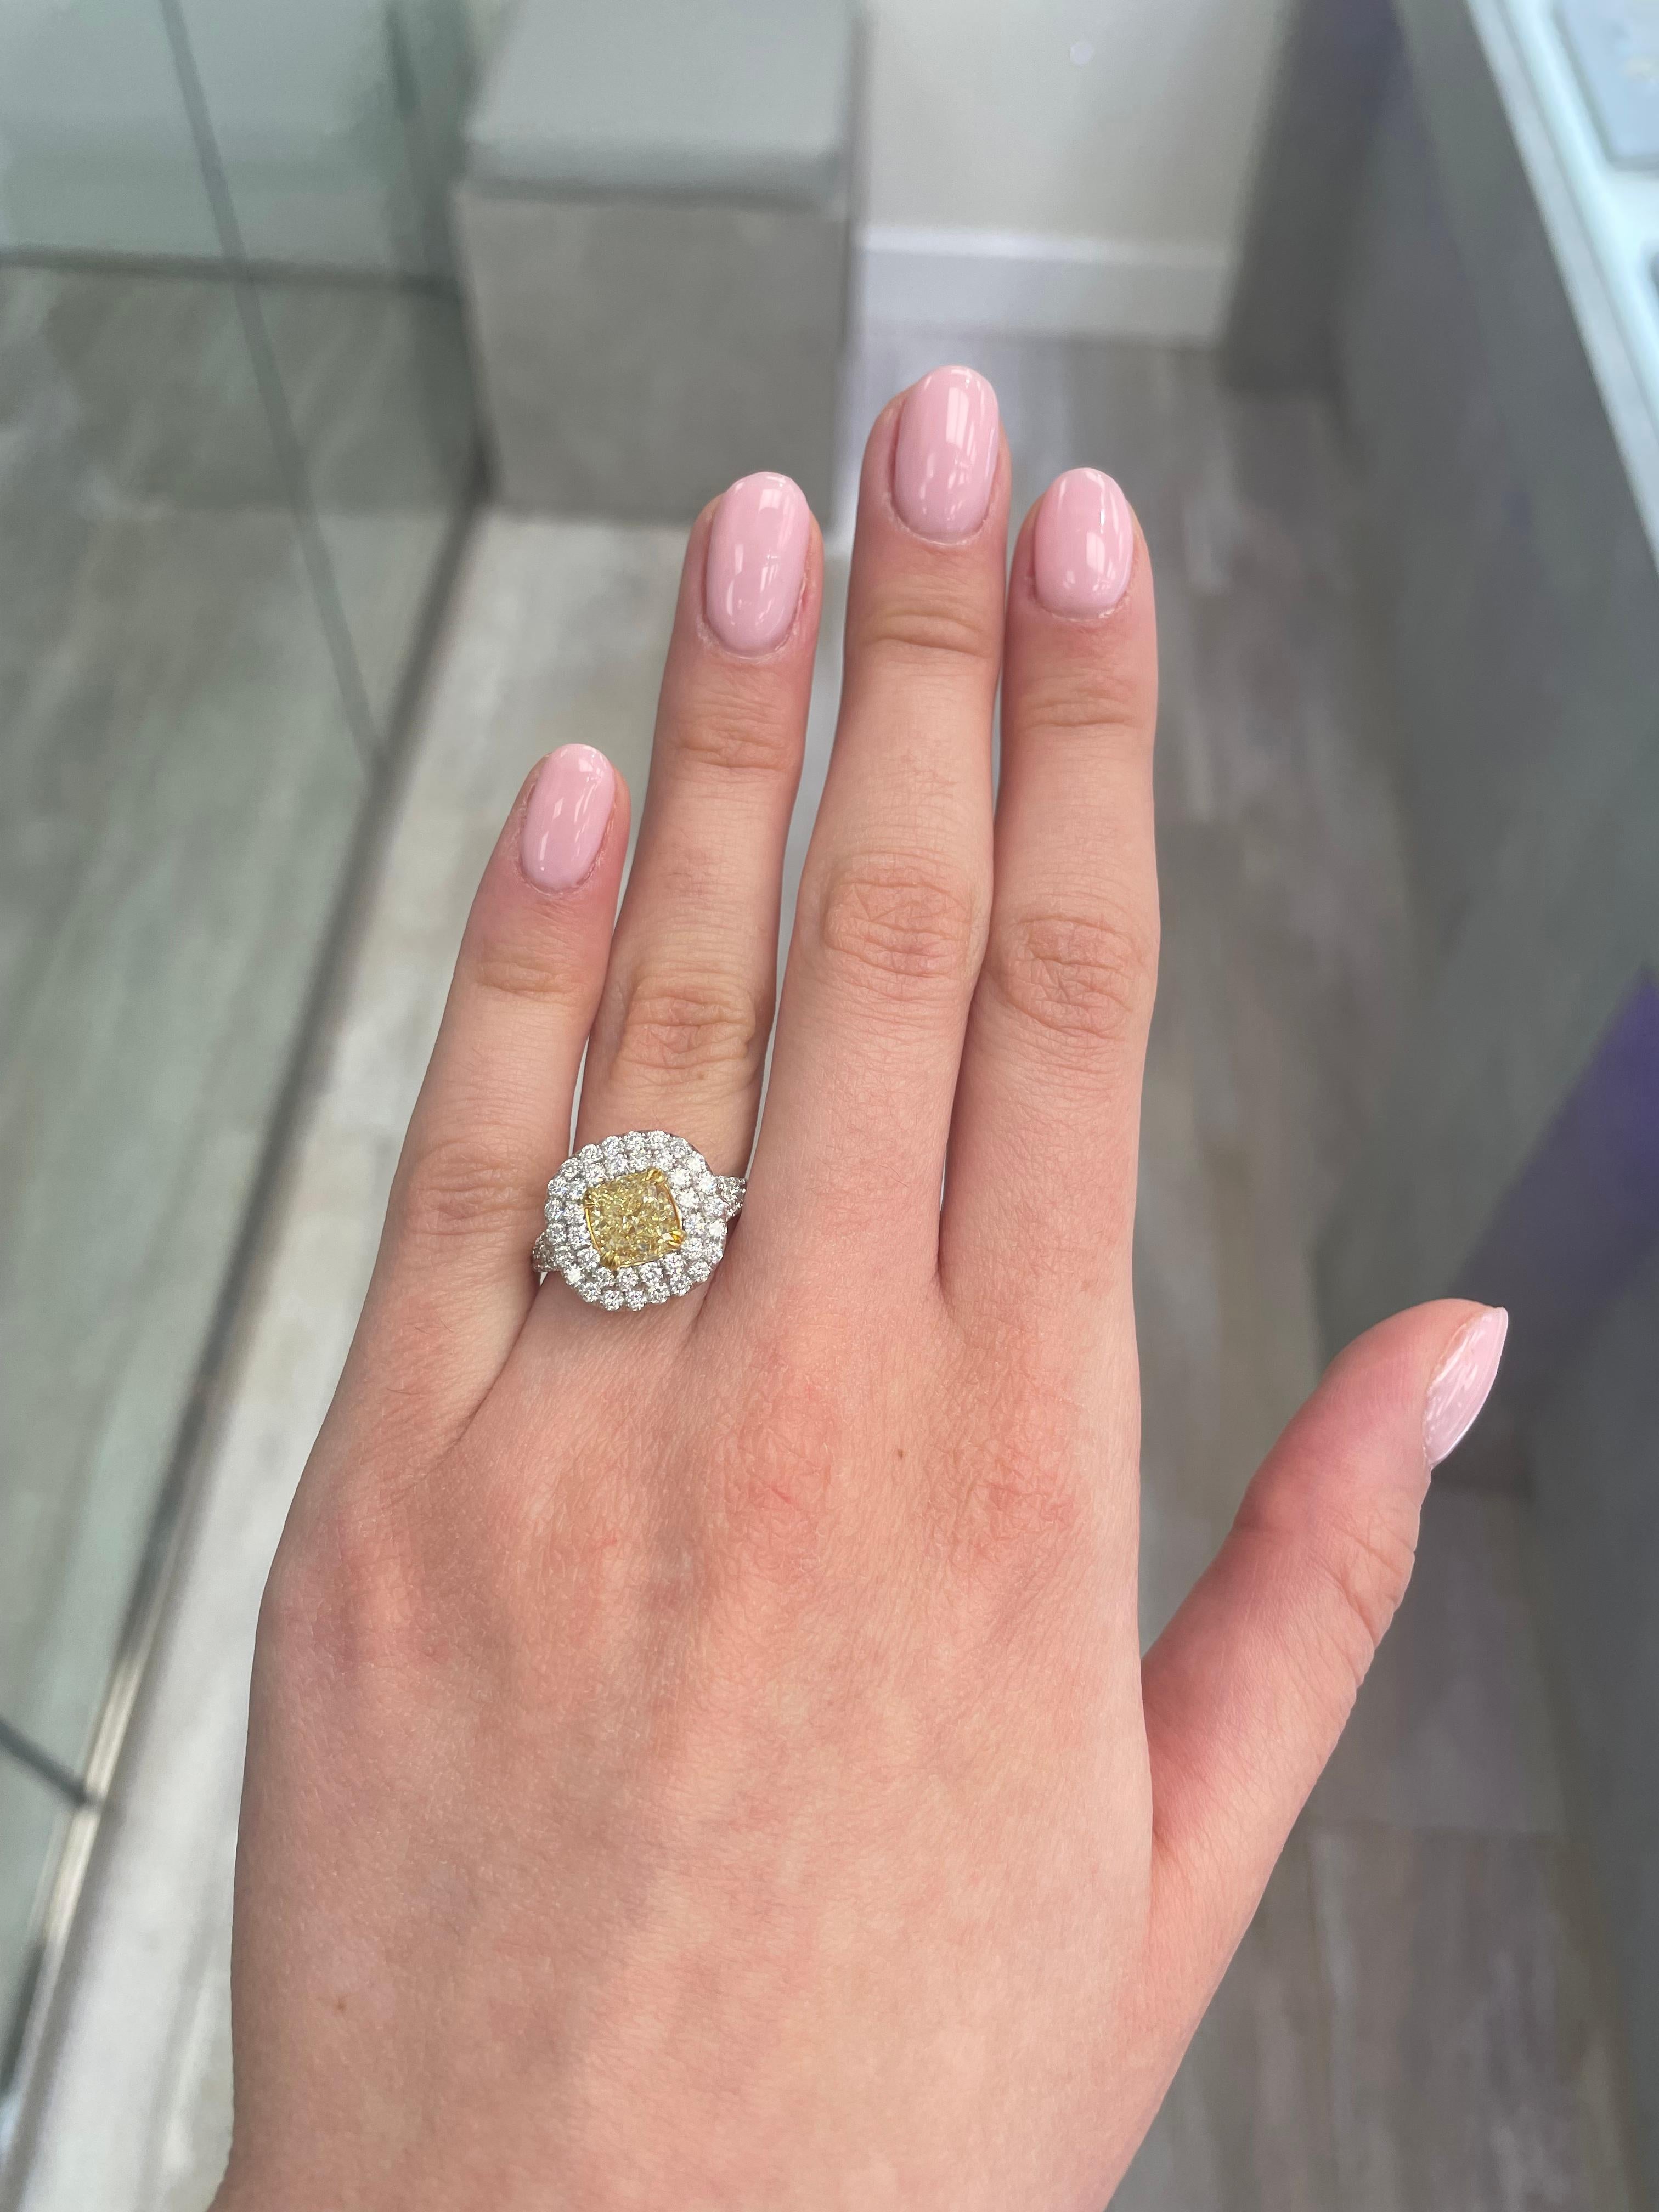 Stunning modern EGL certified yellow diamond double halo ring, two-tone 18k yellow and white gold. By Alexander Beverly Hills
3.19 carats total diamond weight.
2.02 carat cushion cut Fancy Intense Yellow color and VS2 clarity diamond, EGL graded in